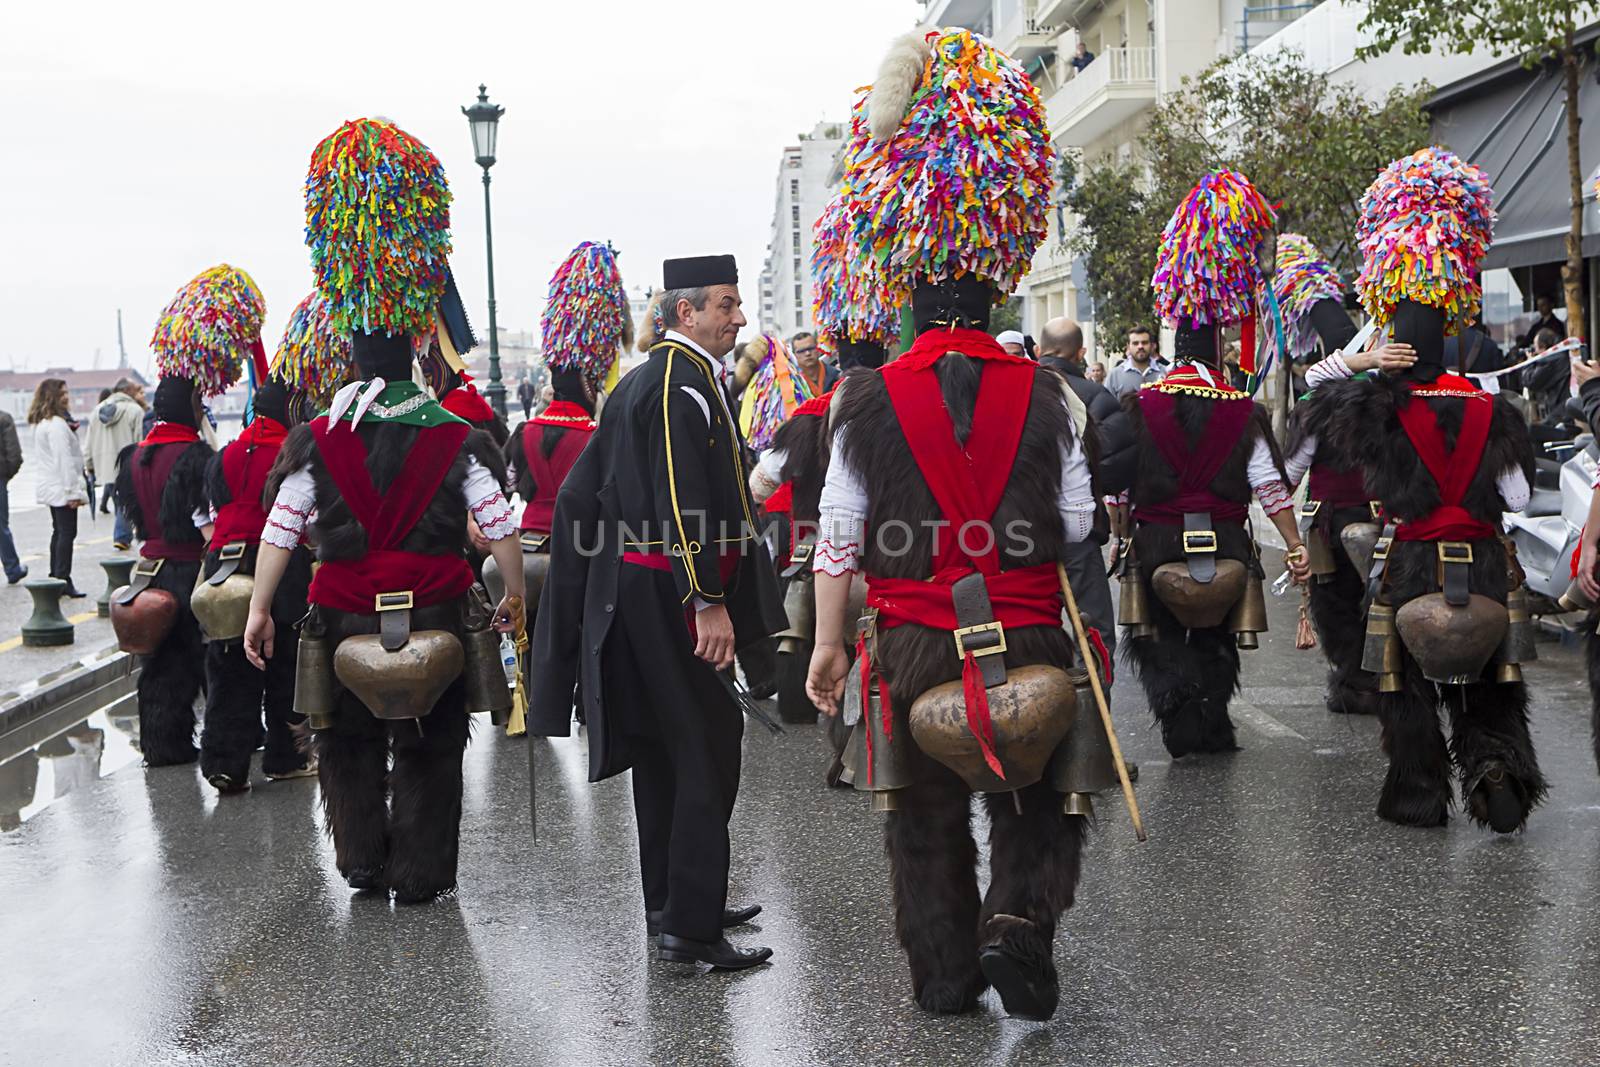 Bell bearers Parade in Thessaloniki by ververidis